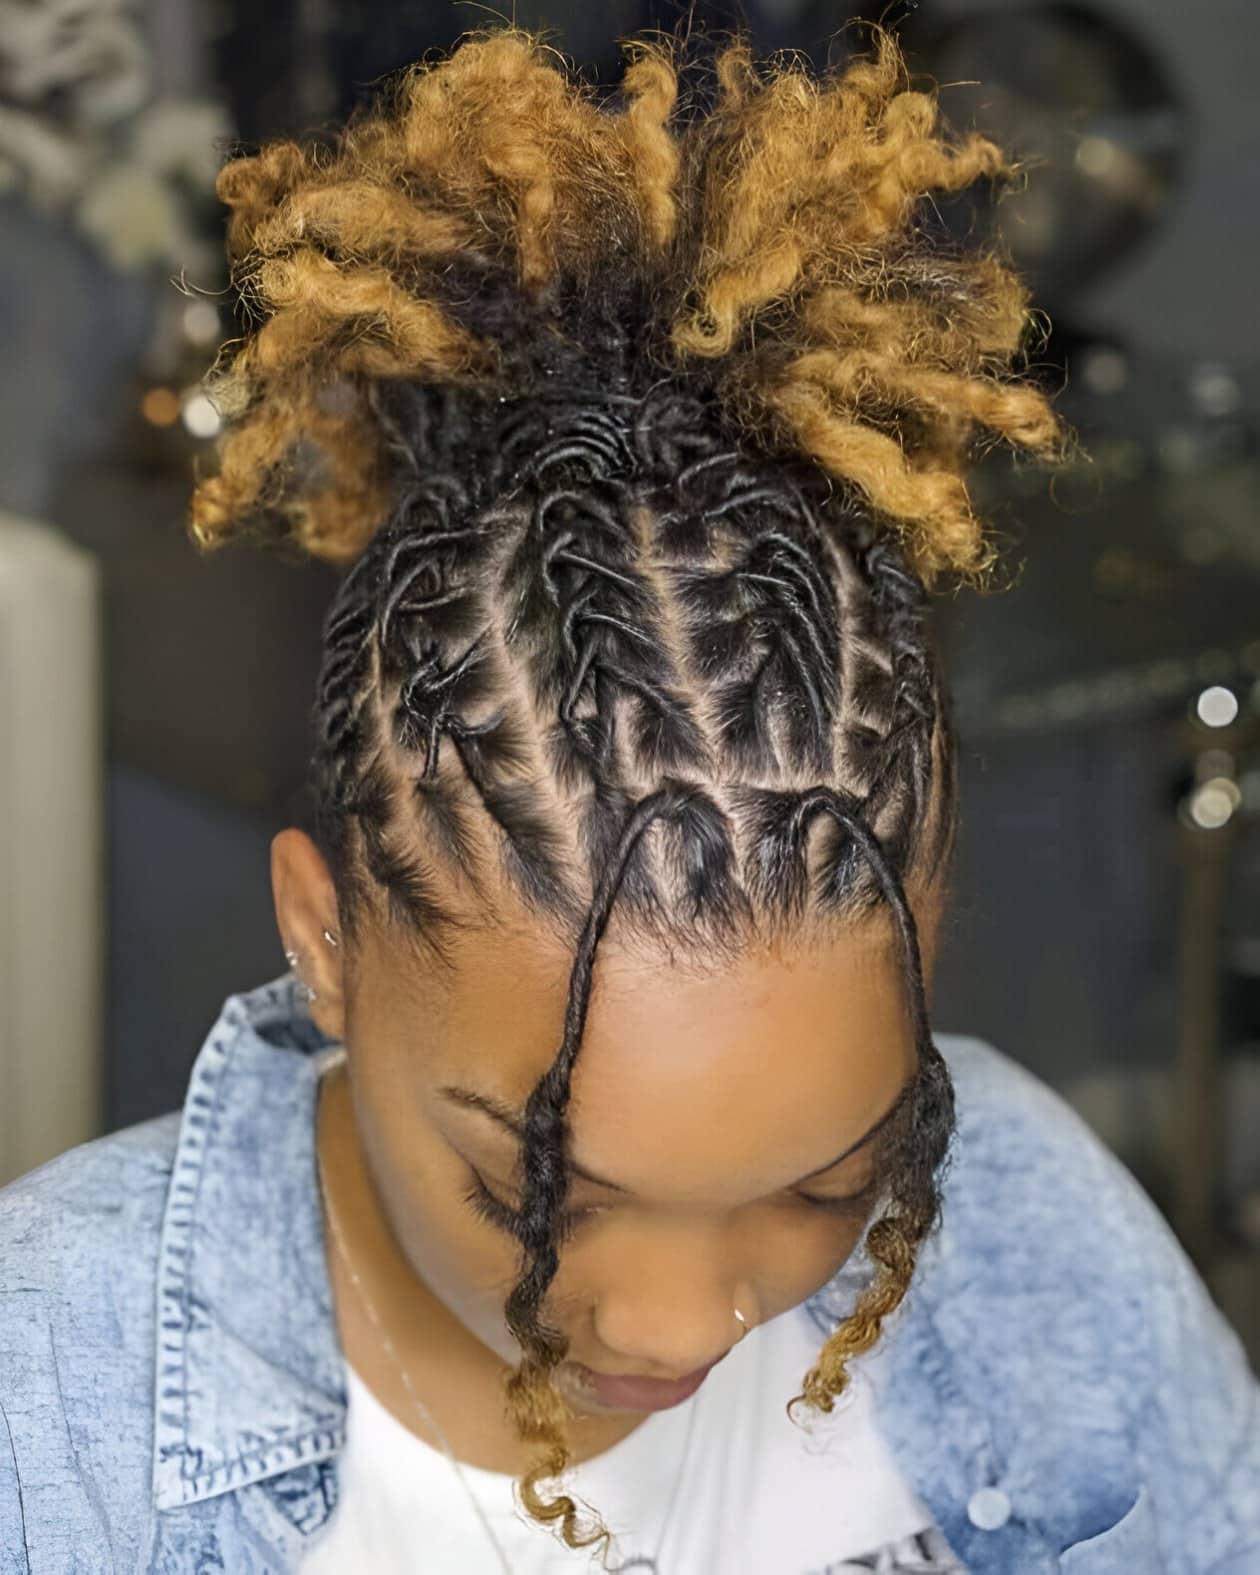 Image of Barrel Twist Updo With Curls inspired by Barrel Twist Hairstyles